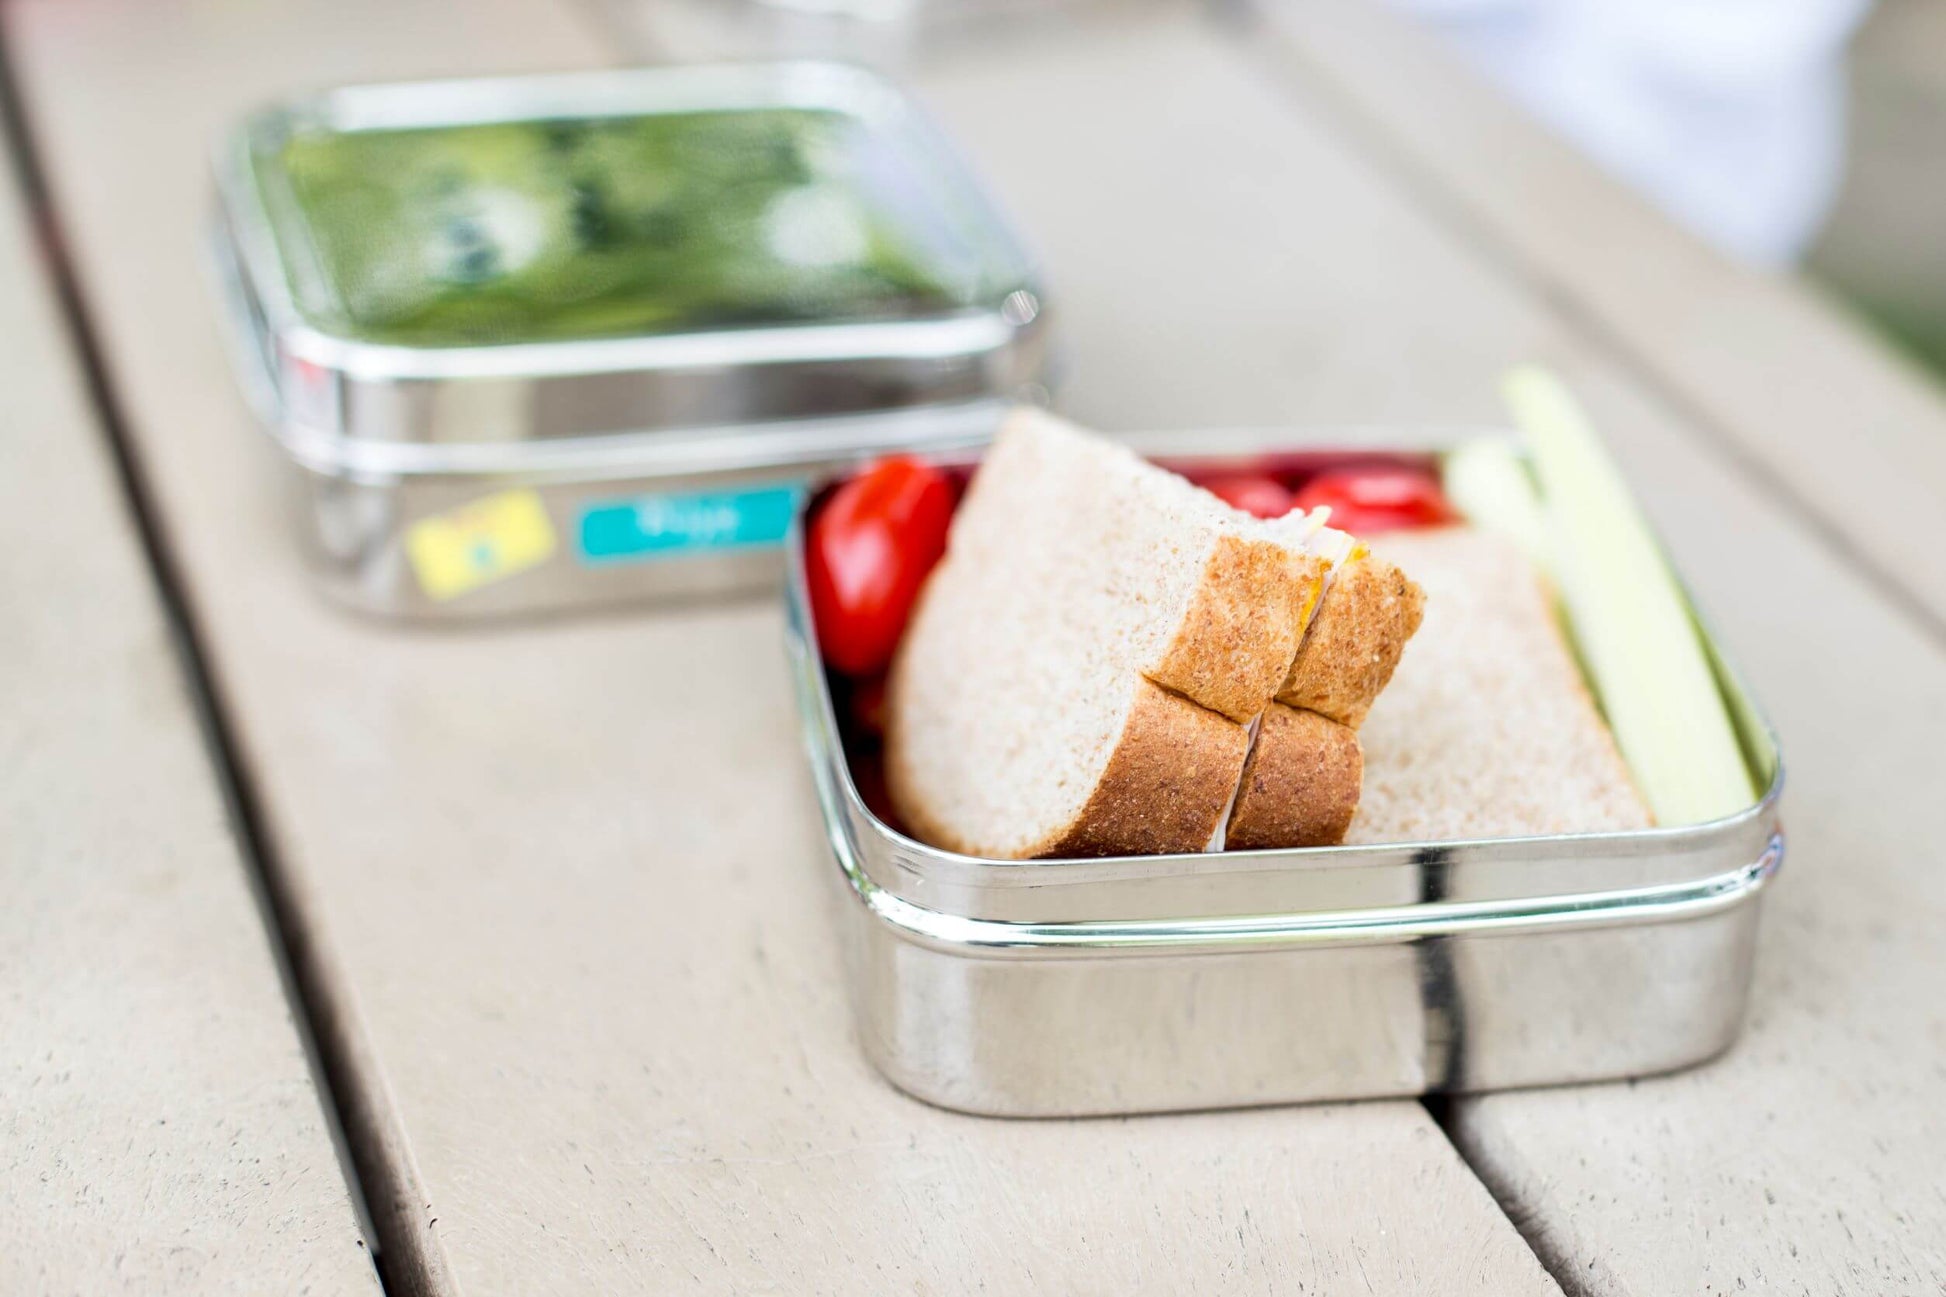 Sandwich and vegetables in square stainless steel sandwich box with lid on picnic table